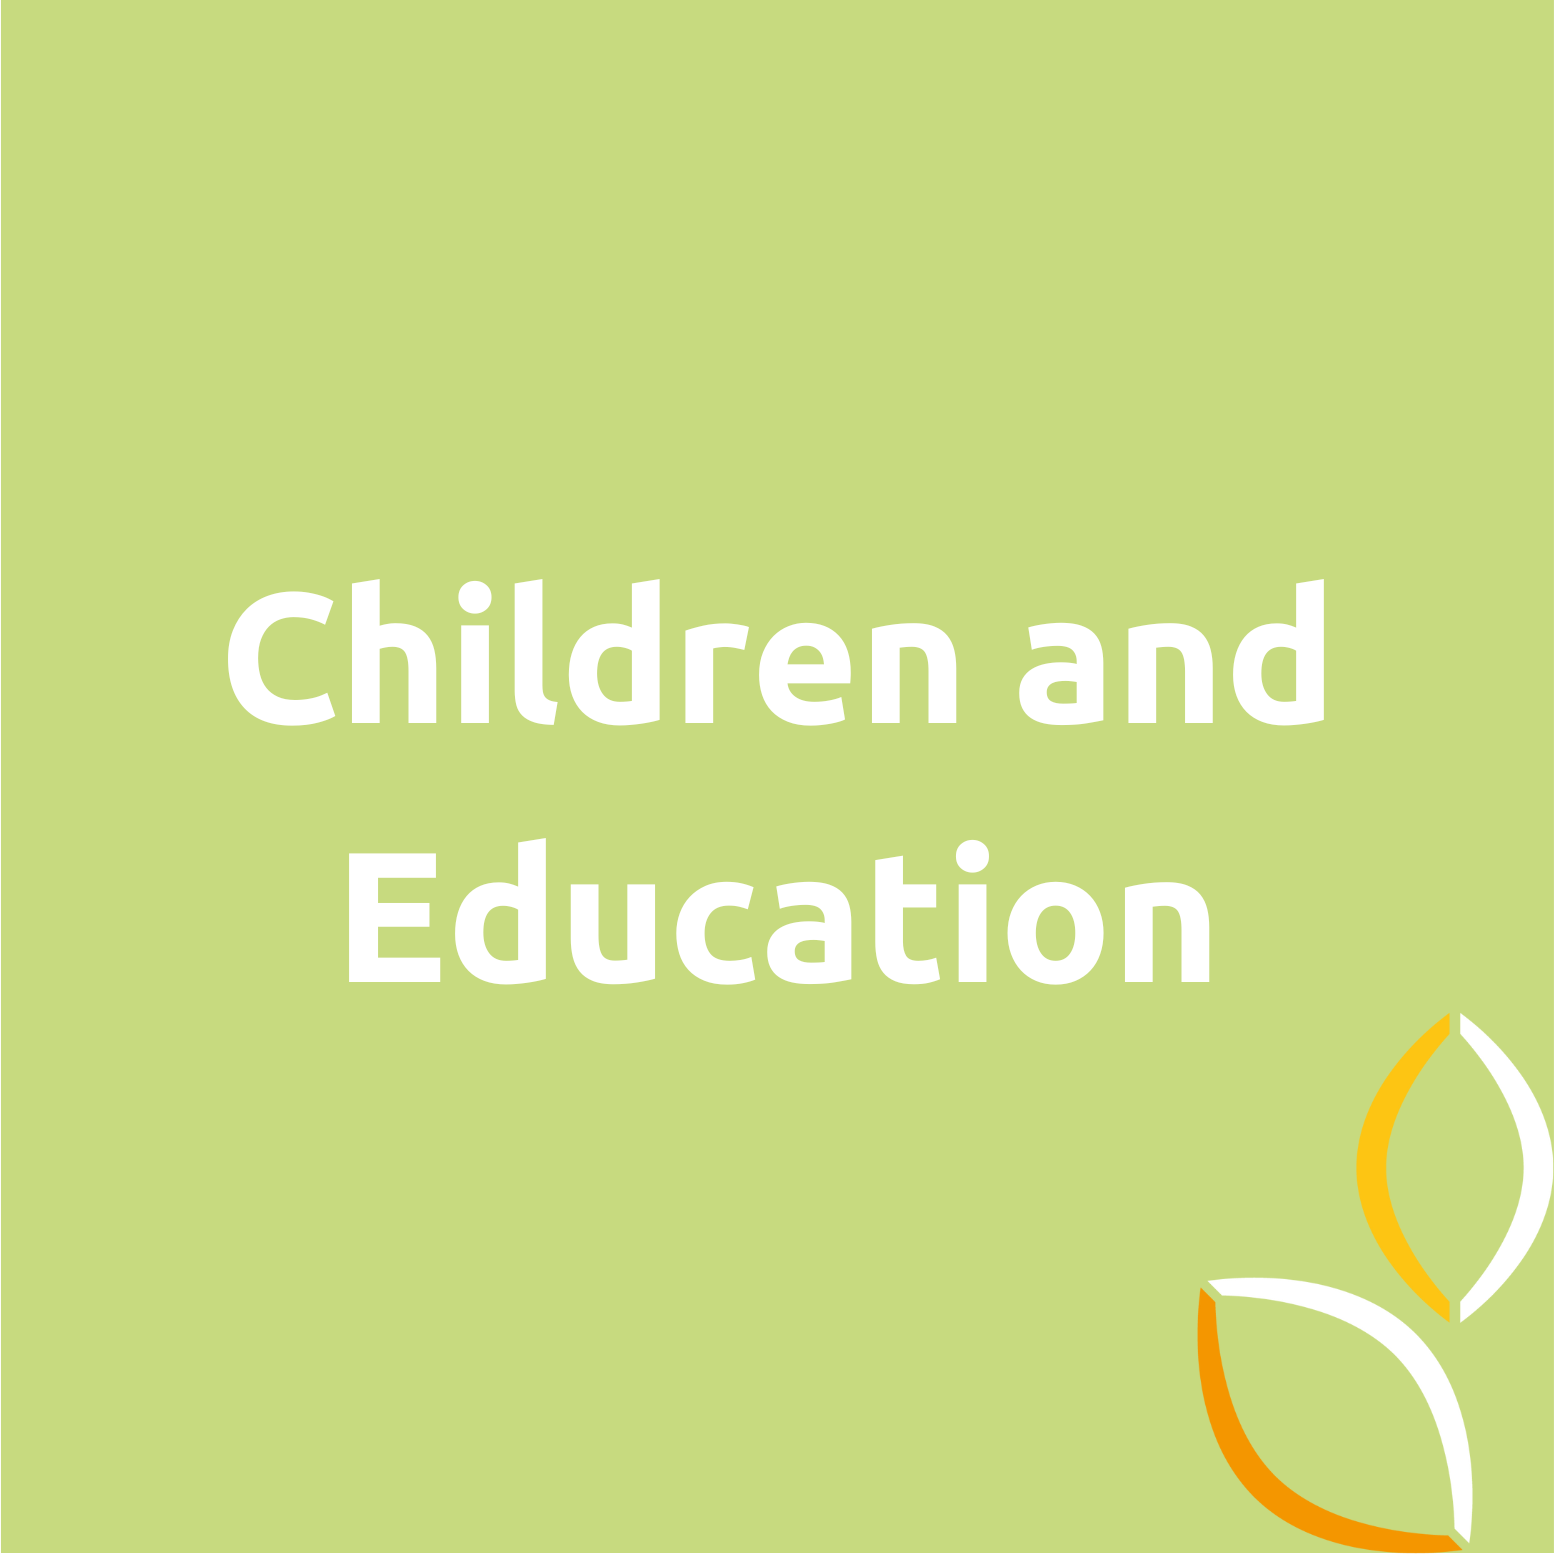 Children and Education